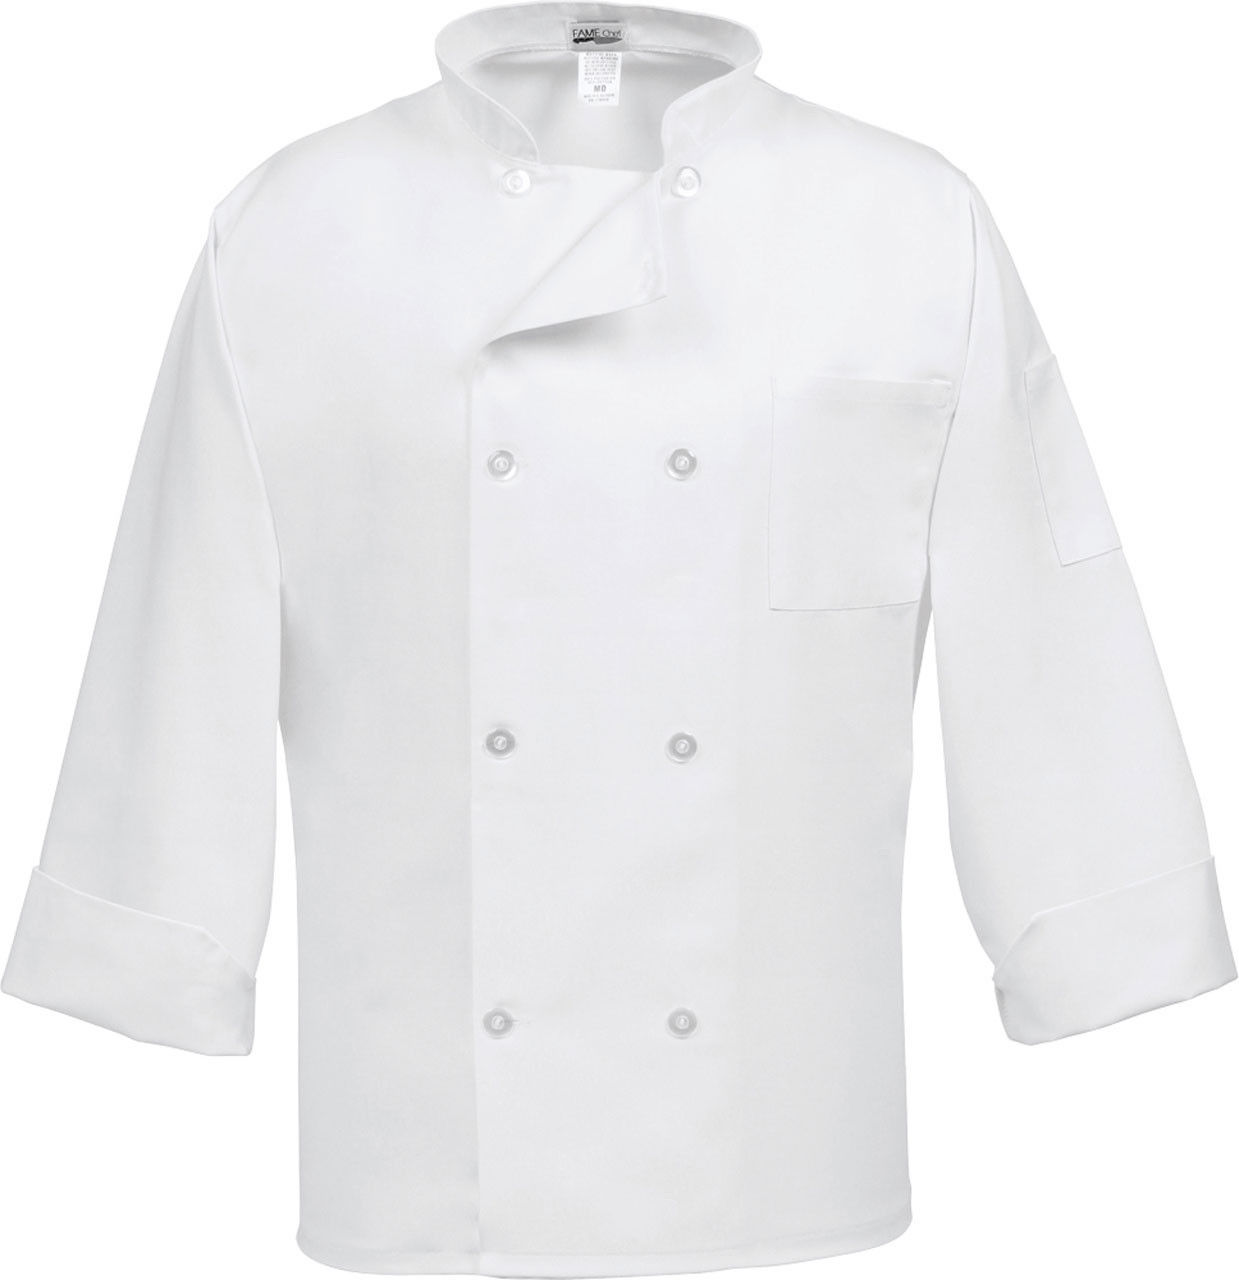 Is the chef coat button left or right before I purchase?